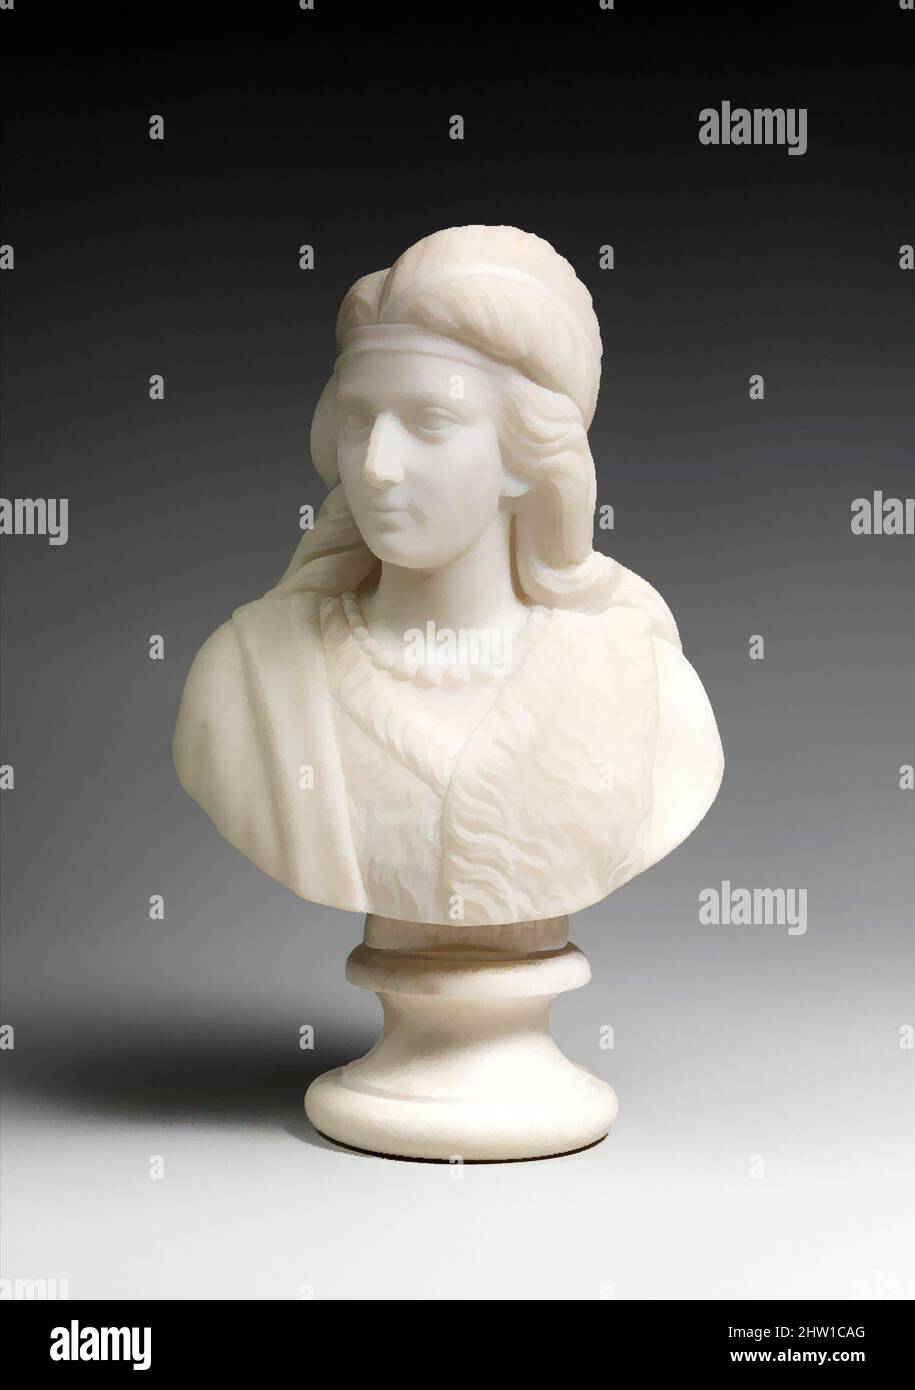 Art inspired by Minnehaha, 1868, Made in Rome, Italy, Marble, 11 5/8 × 7 1/4 × 4 7/8 in. (29.5 × 18.4 × 12.4 cm), Sculpture, Edmonia Lewis (American, 1844–1907), Like many American sculptors of the nineteenth century, Lewis, an artist of African-American and Chippewa (Ojibwa) ancestry, Classic works modernized by Artotop with a splash of modernity. Shapes, color and value, eye-catching visual impact on art. Emotions through freedom of artworks in a contemporary way. A timeless message pursuing a wildly creative new direction. Artists turning to the digital medium and creating the Artotop NFT Stock Photo